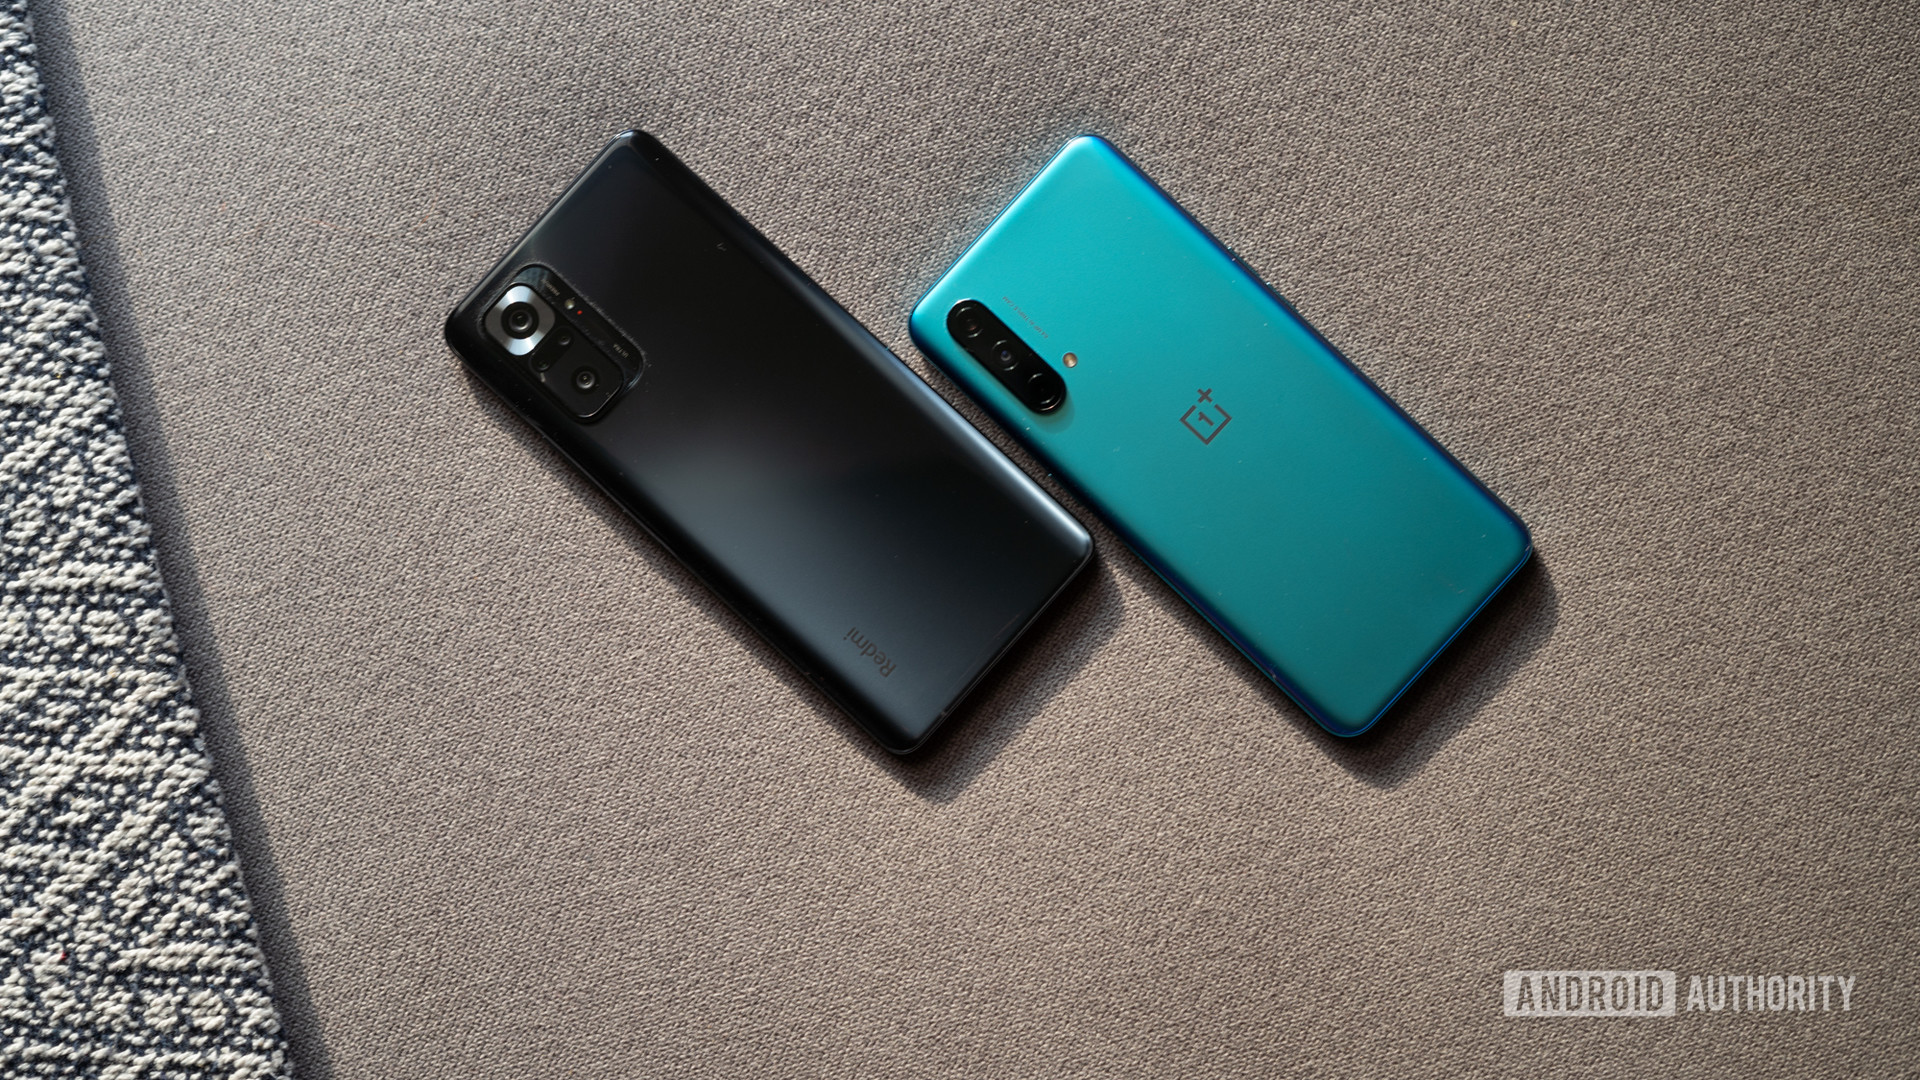 The OnePlus Nord CE vs Redmi Note 10 Pro showing the rear panels.